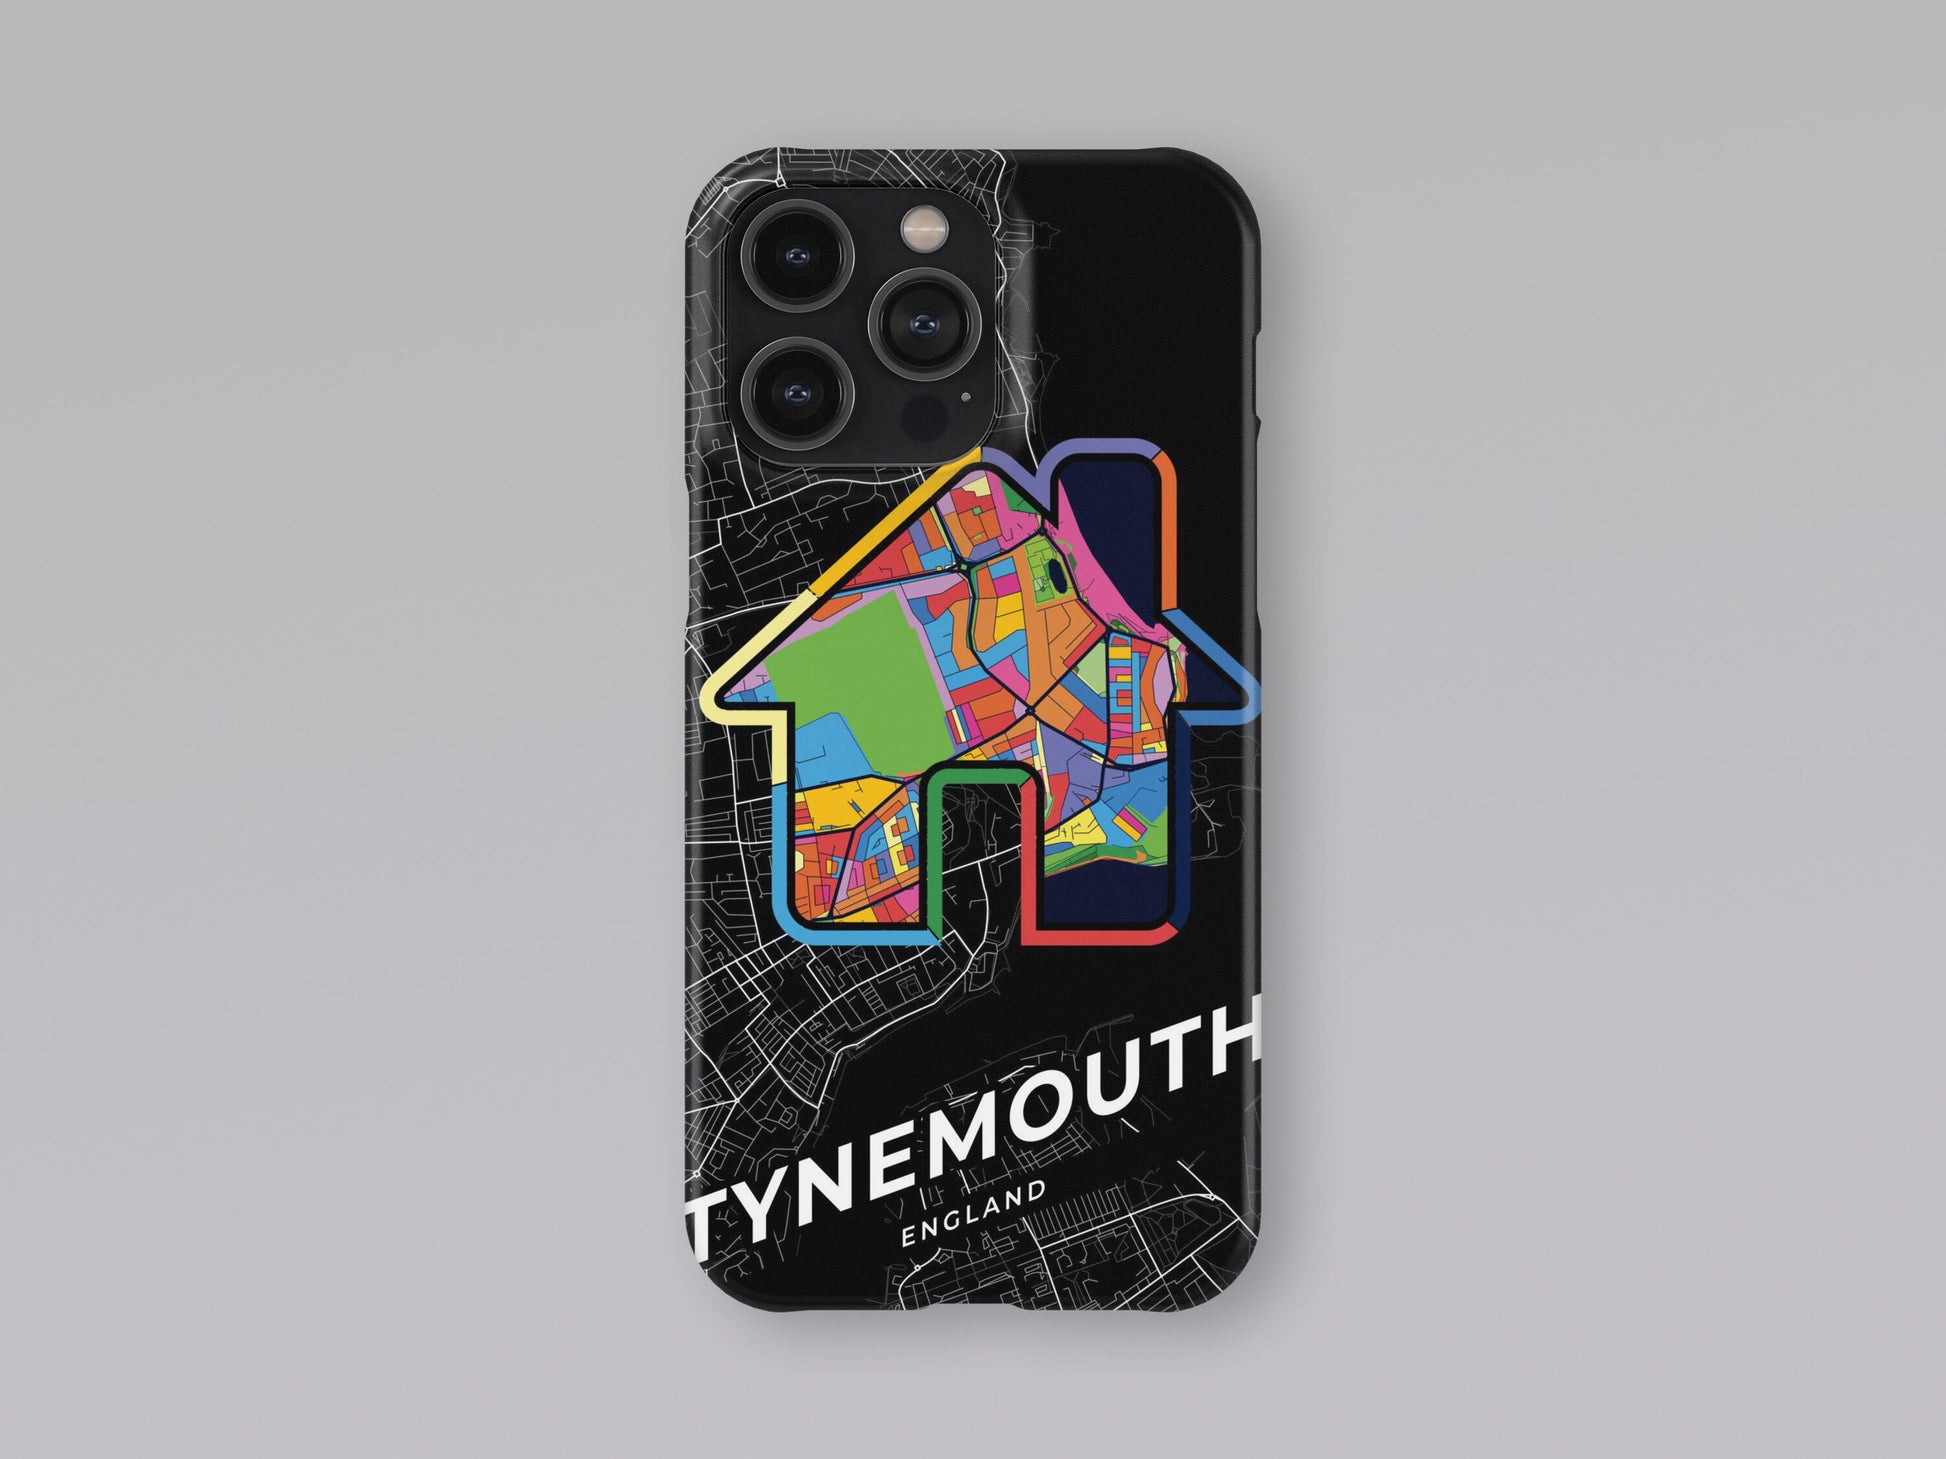 Tynemouth England slim phone case with colorful icon 3